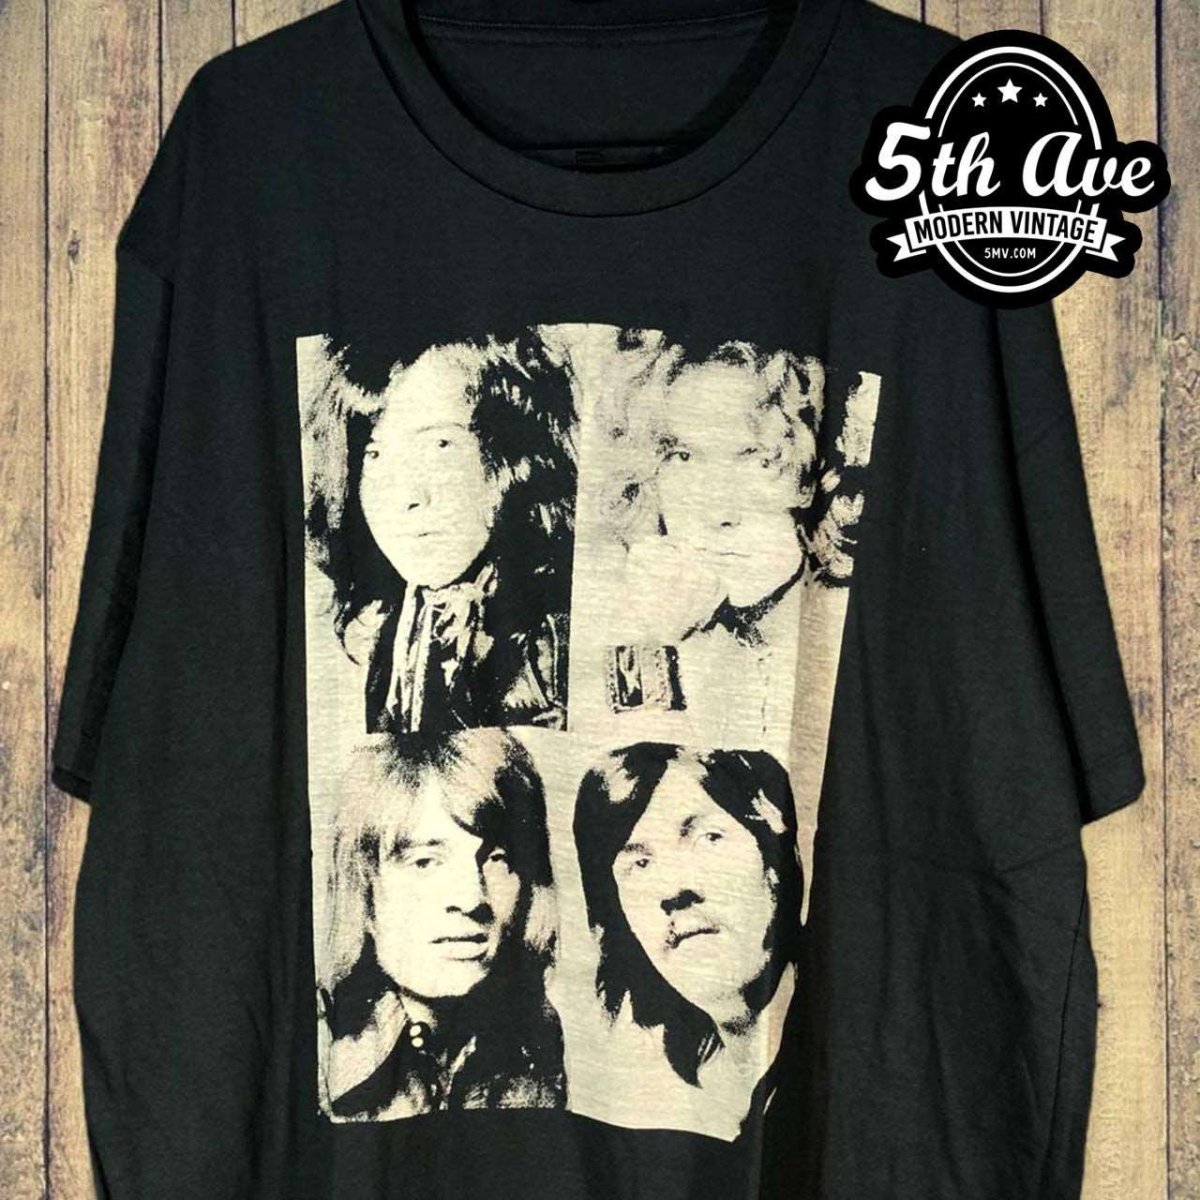 Classic 70s Led Zeppelin Band T-Shirt: Black & White Vintage-Style Silkscreen, Super Soft Faded Fabric, Single Stitch, 30-Day Full Refund Guarantee - Vintage Band Shirts